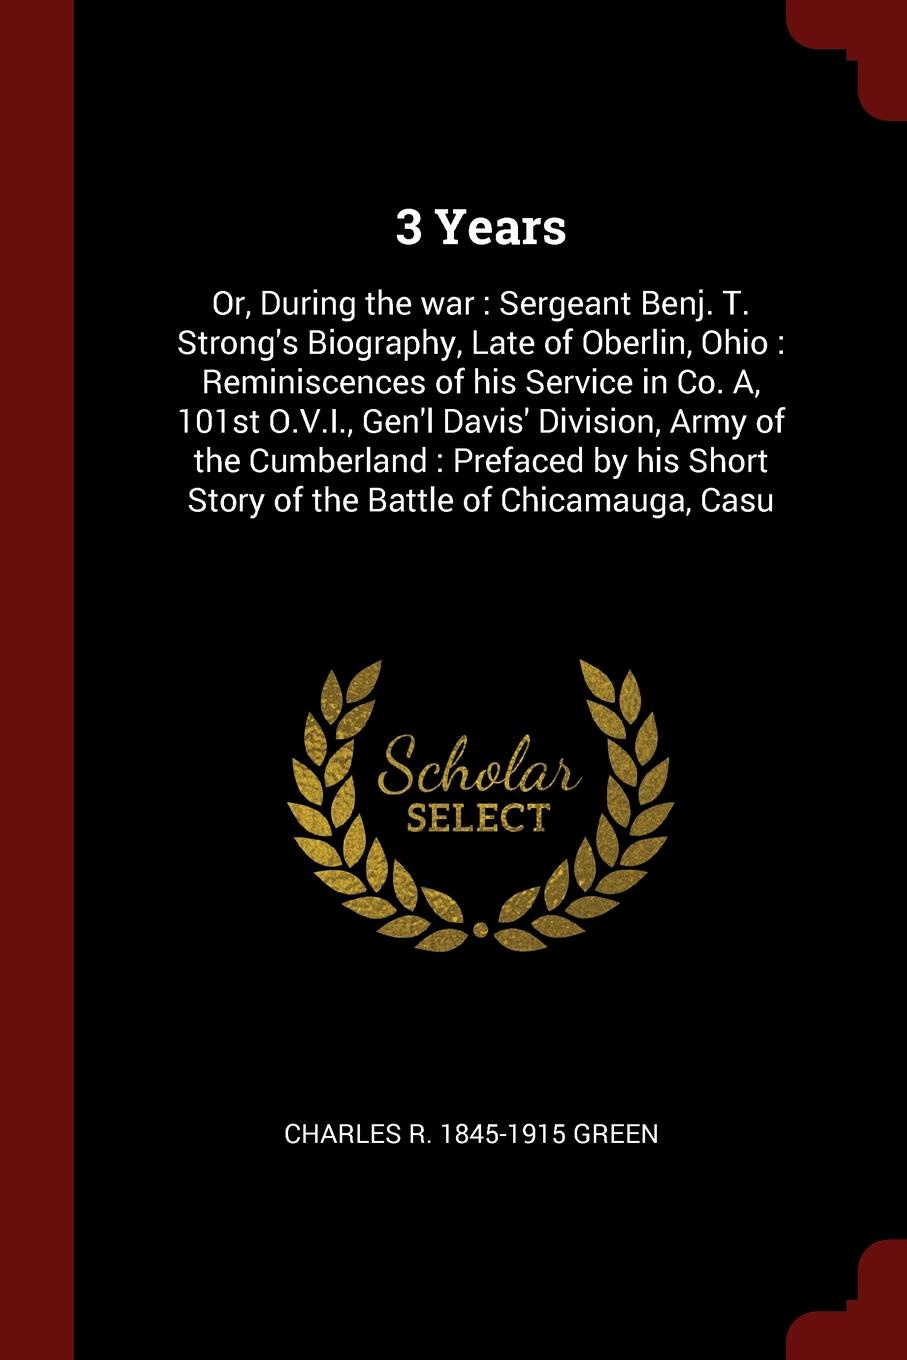 3 Years. Or, During the war : Sergeant Benj. T. Strong`s Biography, Late of Oberlin, Ohio : Reminiscences of his Service in Co. A, 101st O.V.I., Gen`l Davis` Division, Army of the Cumberland : Prefaced by his Short Story of the Battle of Chicamaug...